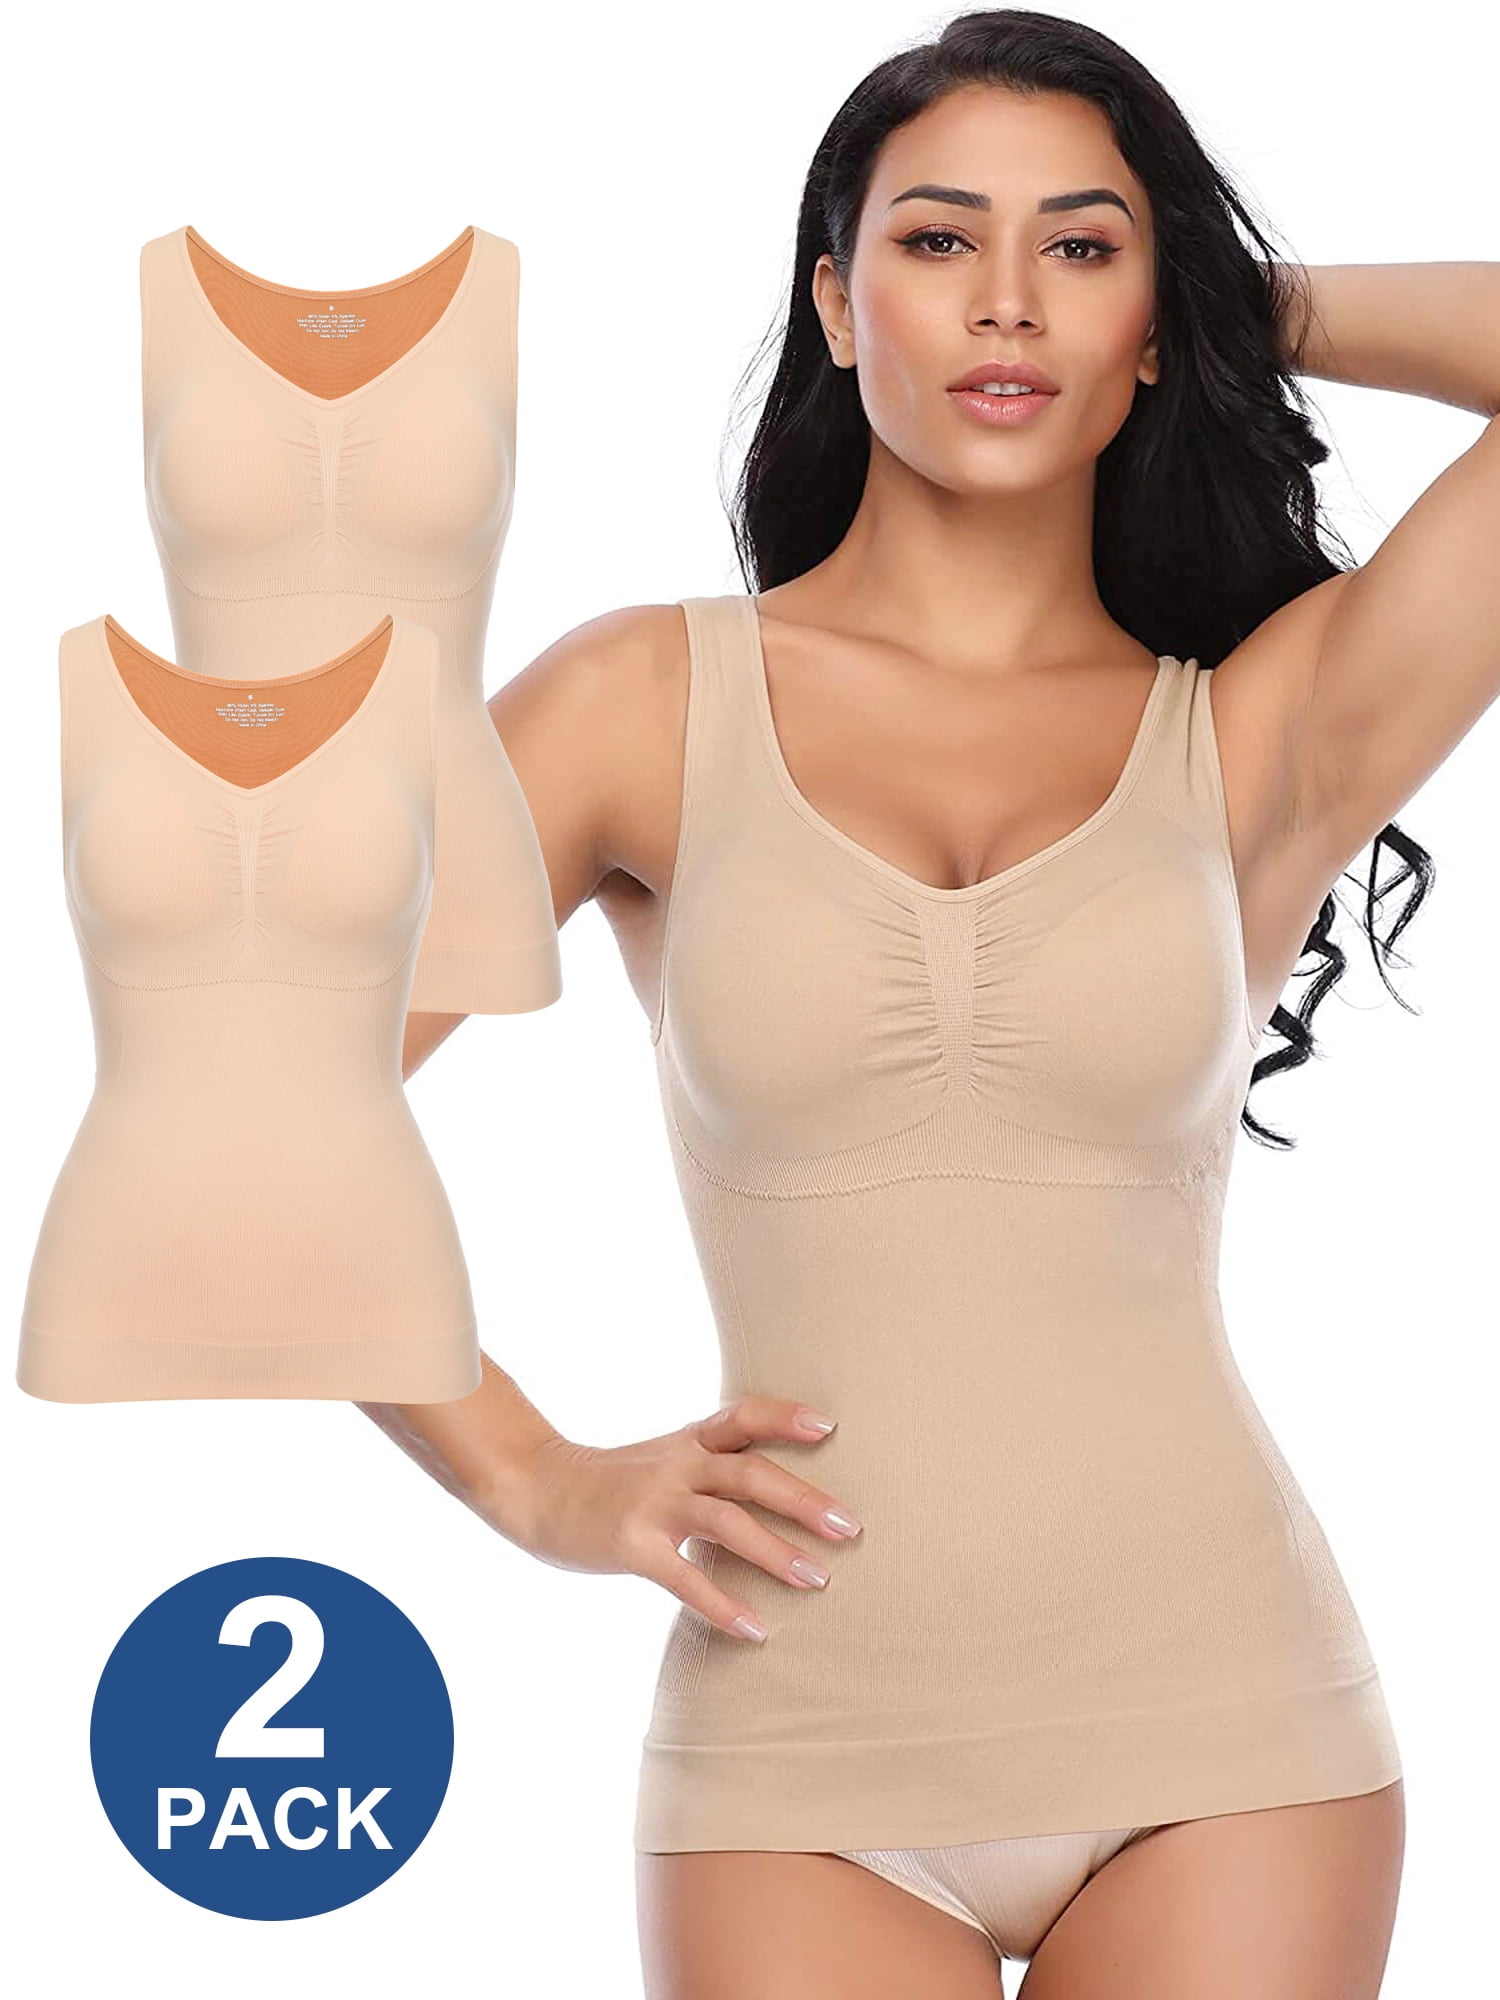 QRIC 2 Pack Tummy Control Camisole for Women Shapewear Tank Tops with Built  in Bra Slimming Compression Top Vest Seamless Body Shaper